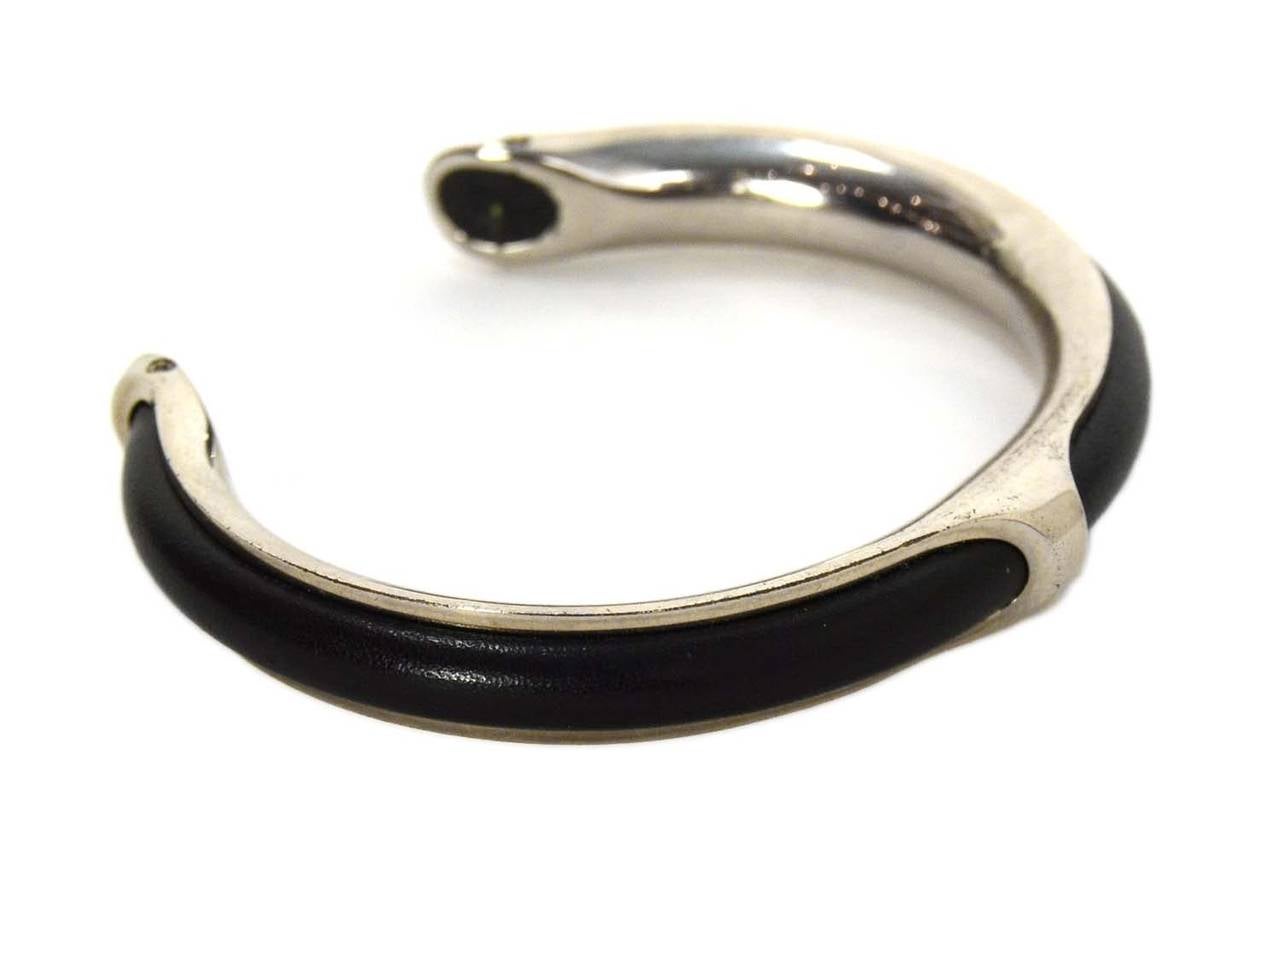 Hermes Black Leather & Silver Kyoto Cuff 
​Made in: France
Stamp: HERMES
Closure: None
Color: Black and silvertone
Materials: Leather and metal
Retail Price: $730 + tax
Overall Condition: Excellent with the exception of some faint scratching